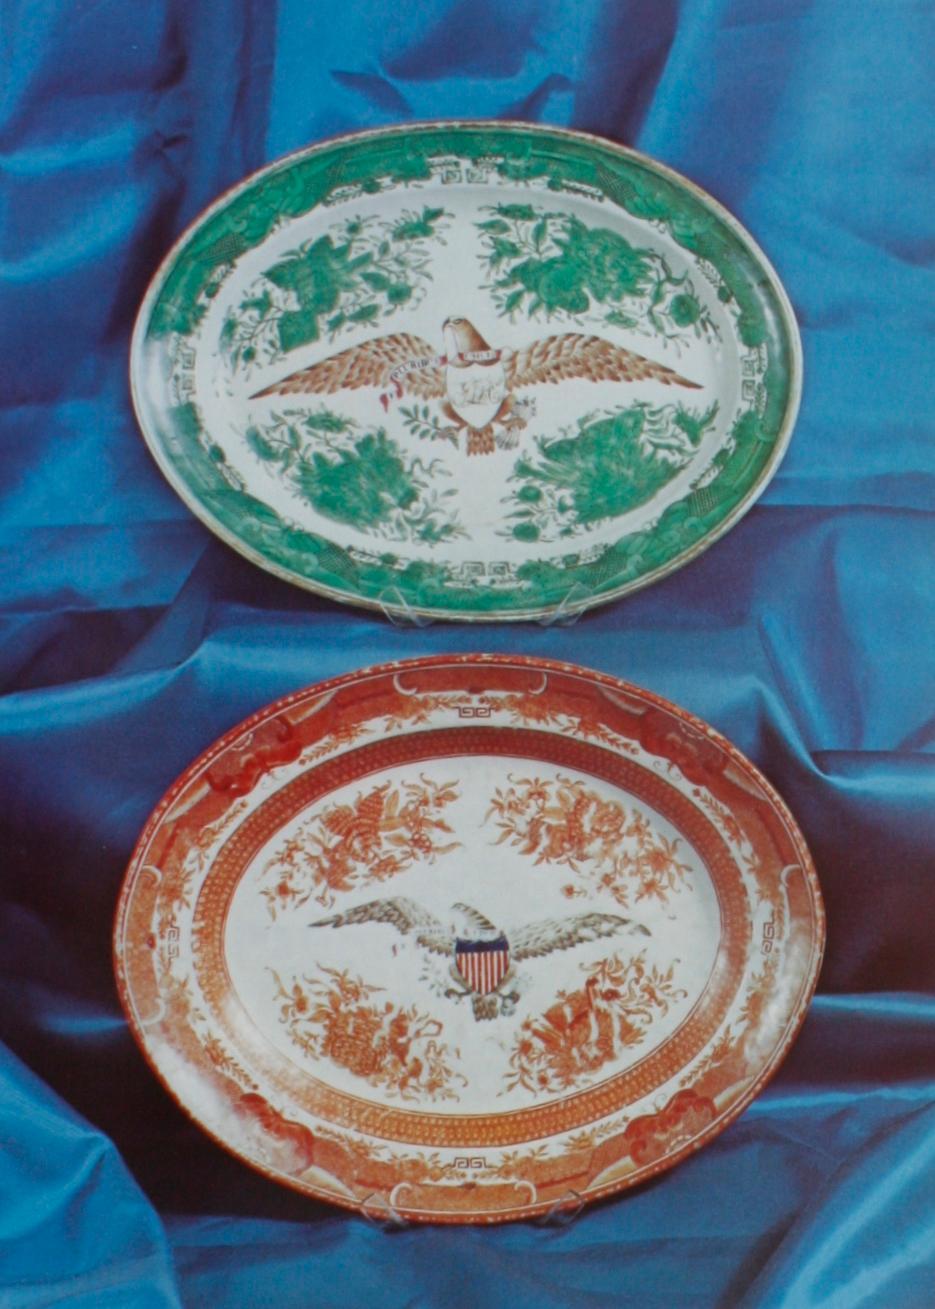 American Chinese Export Porcelain, Standard Patterns and Forms, 1780-1880, First Edition For Sale